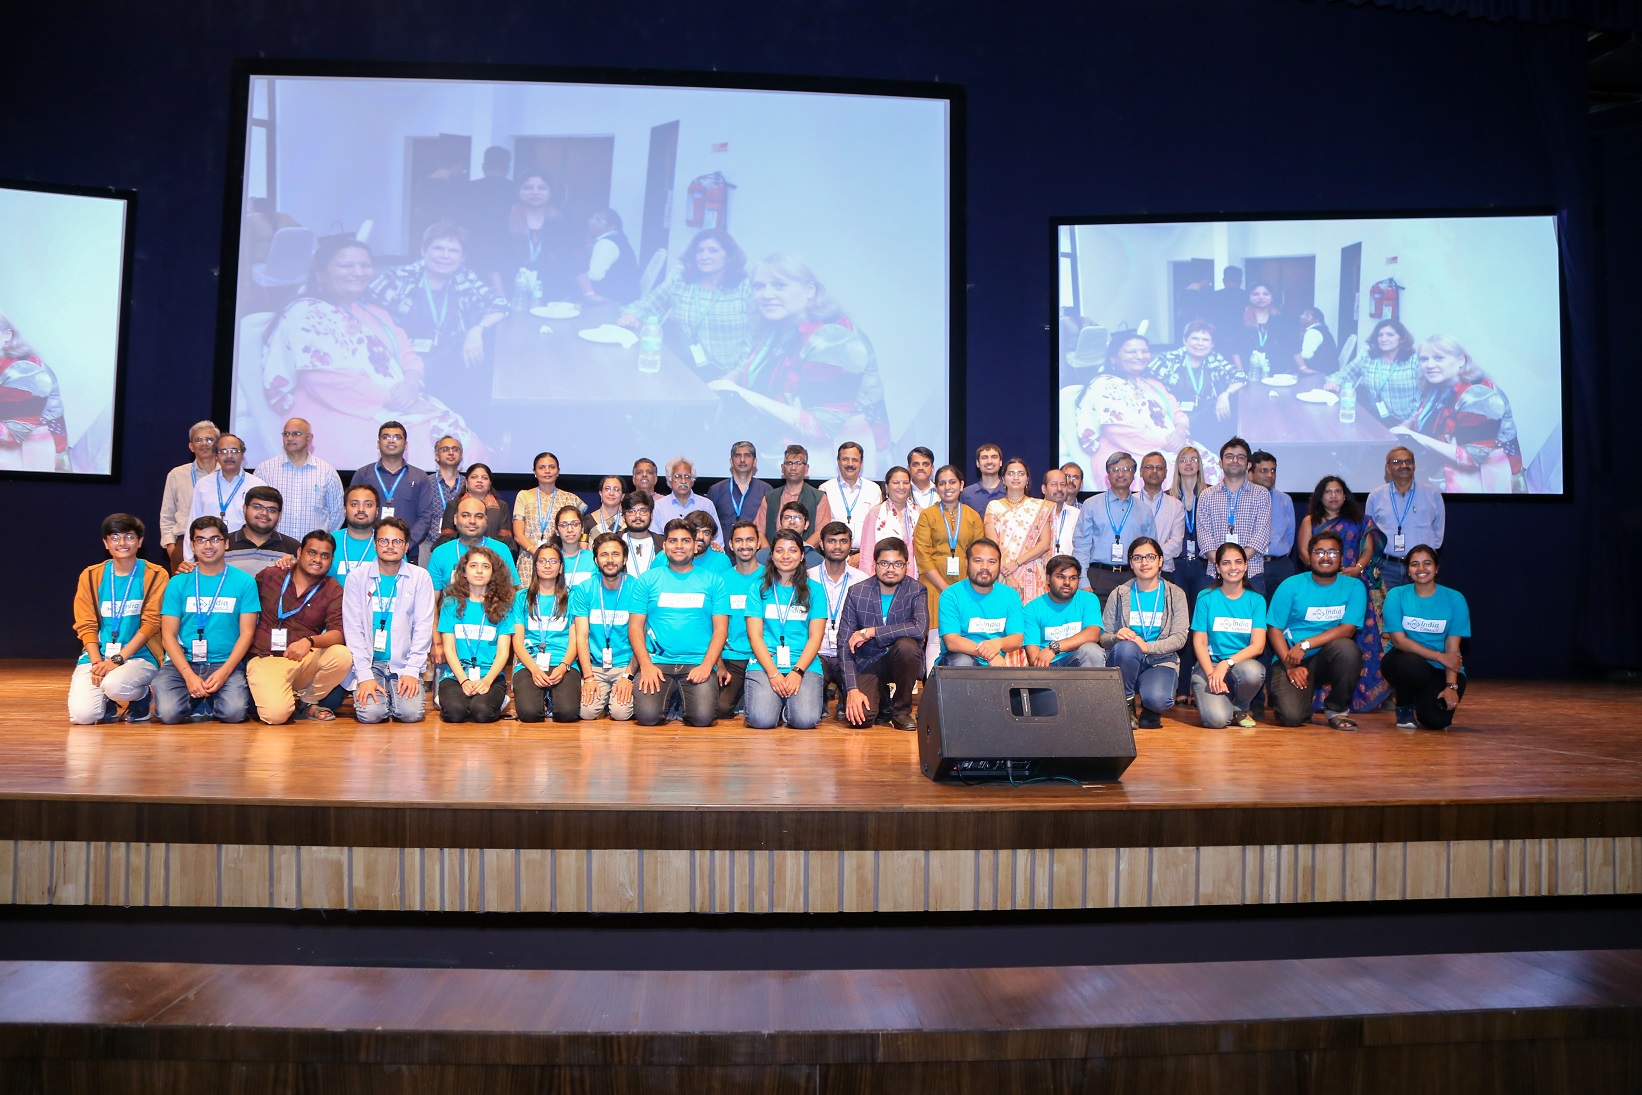 IIT Gandhinagar hosted ACM- India's Annual Event 2020 with more than 1200 participants from all over the country